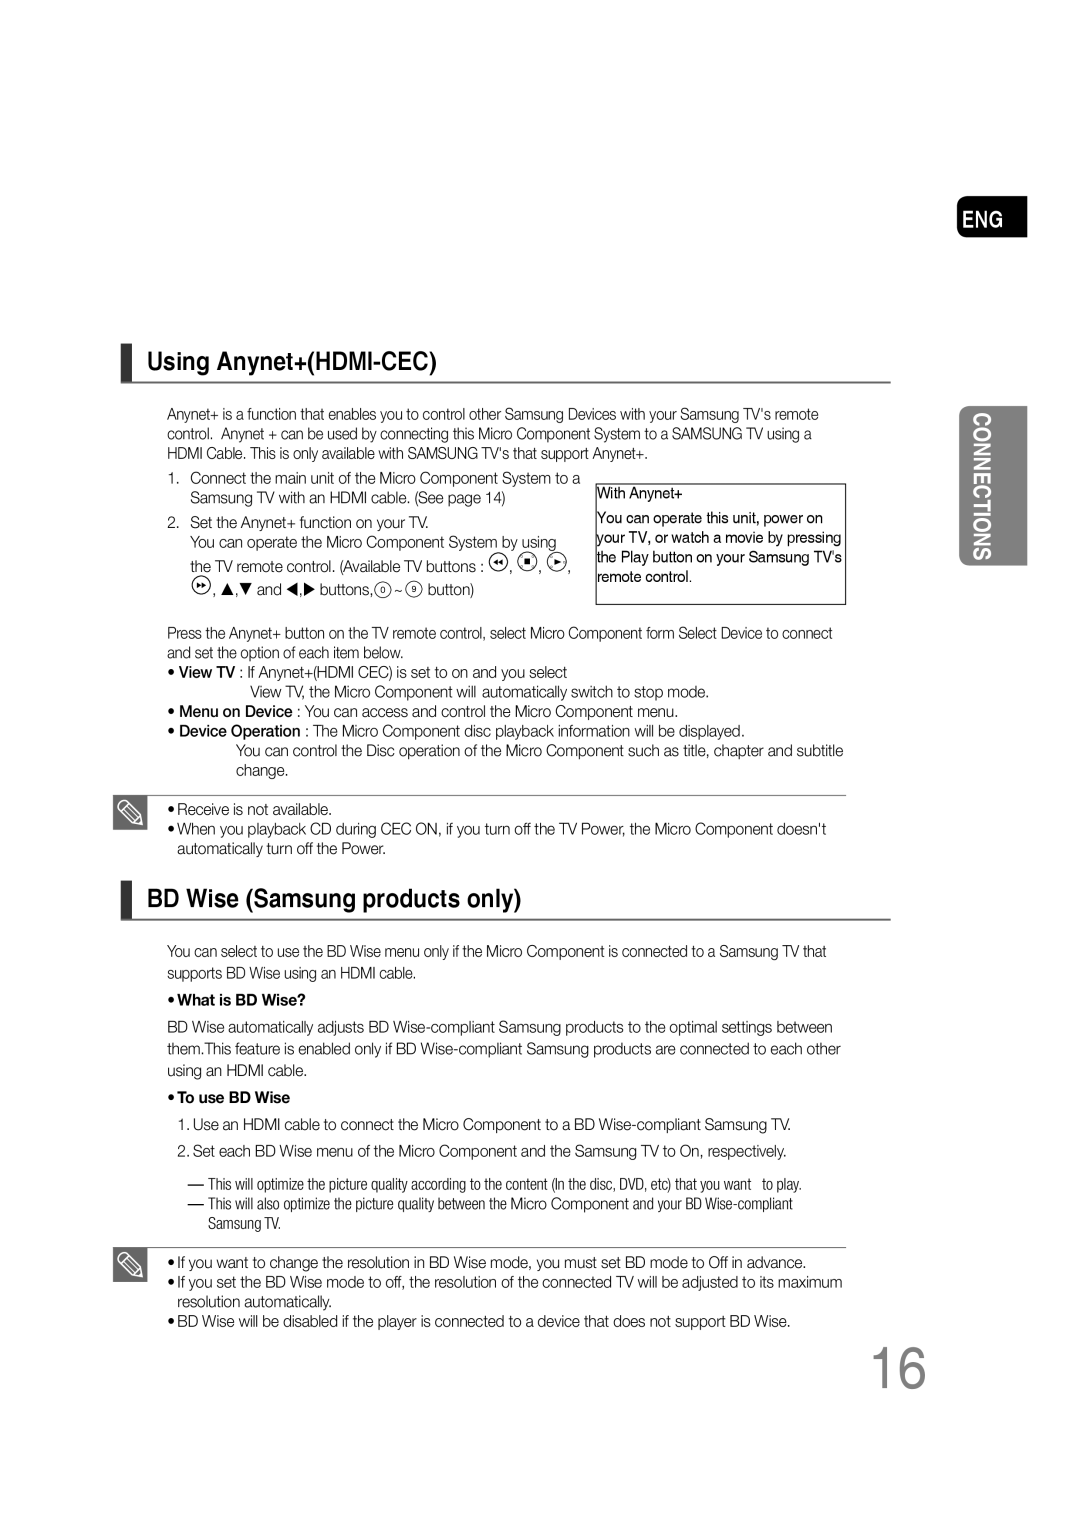 Samsung MM-C430D manual Using Anynet+HDMI-CEC, BD Wise Samsung products only, Connections, What is BD Wise?, To use BD Wise 